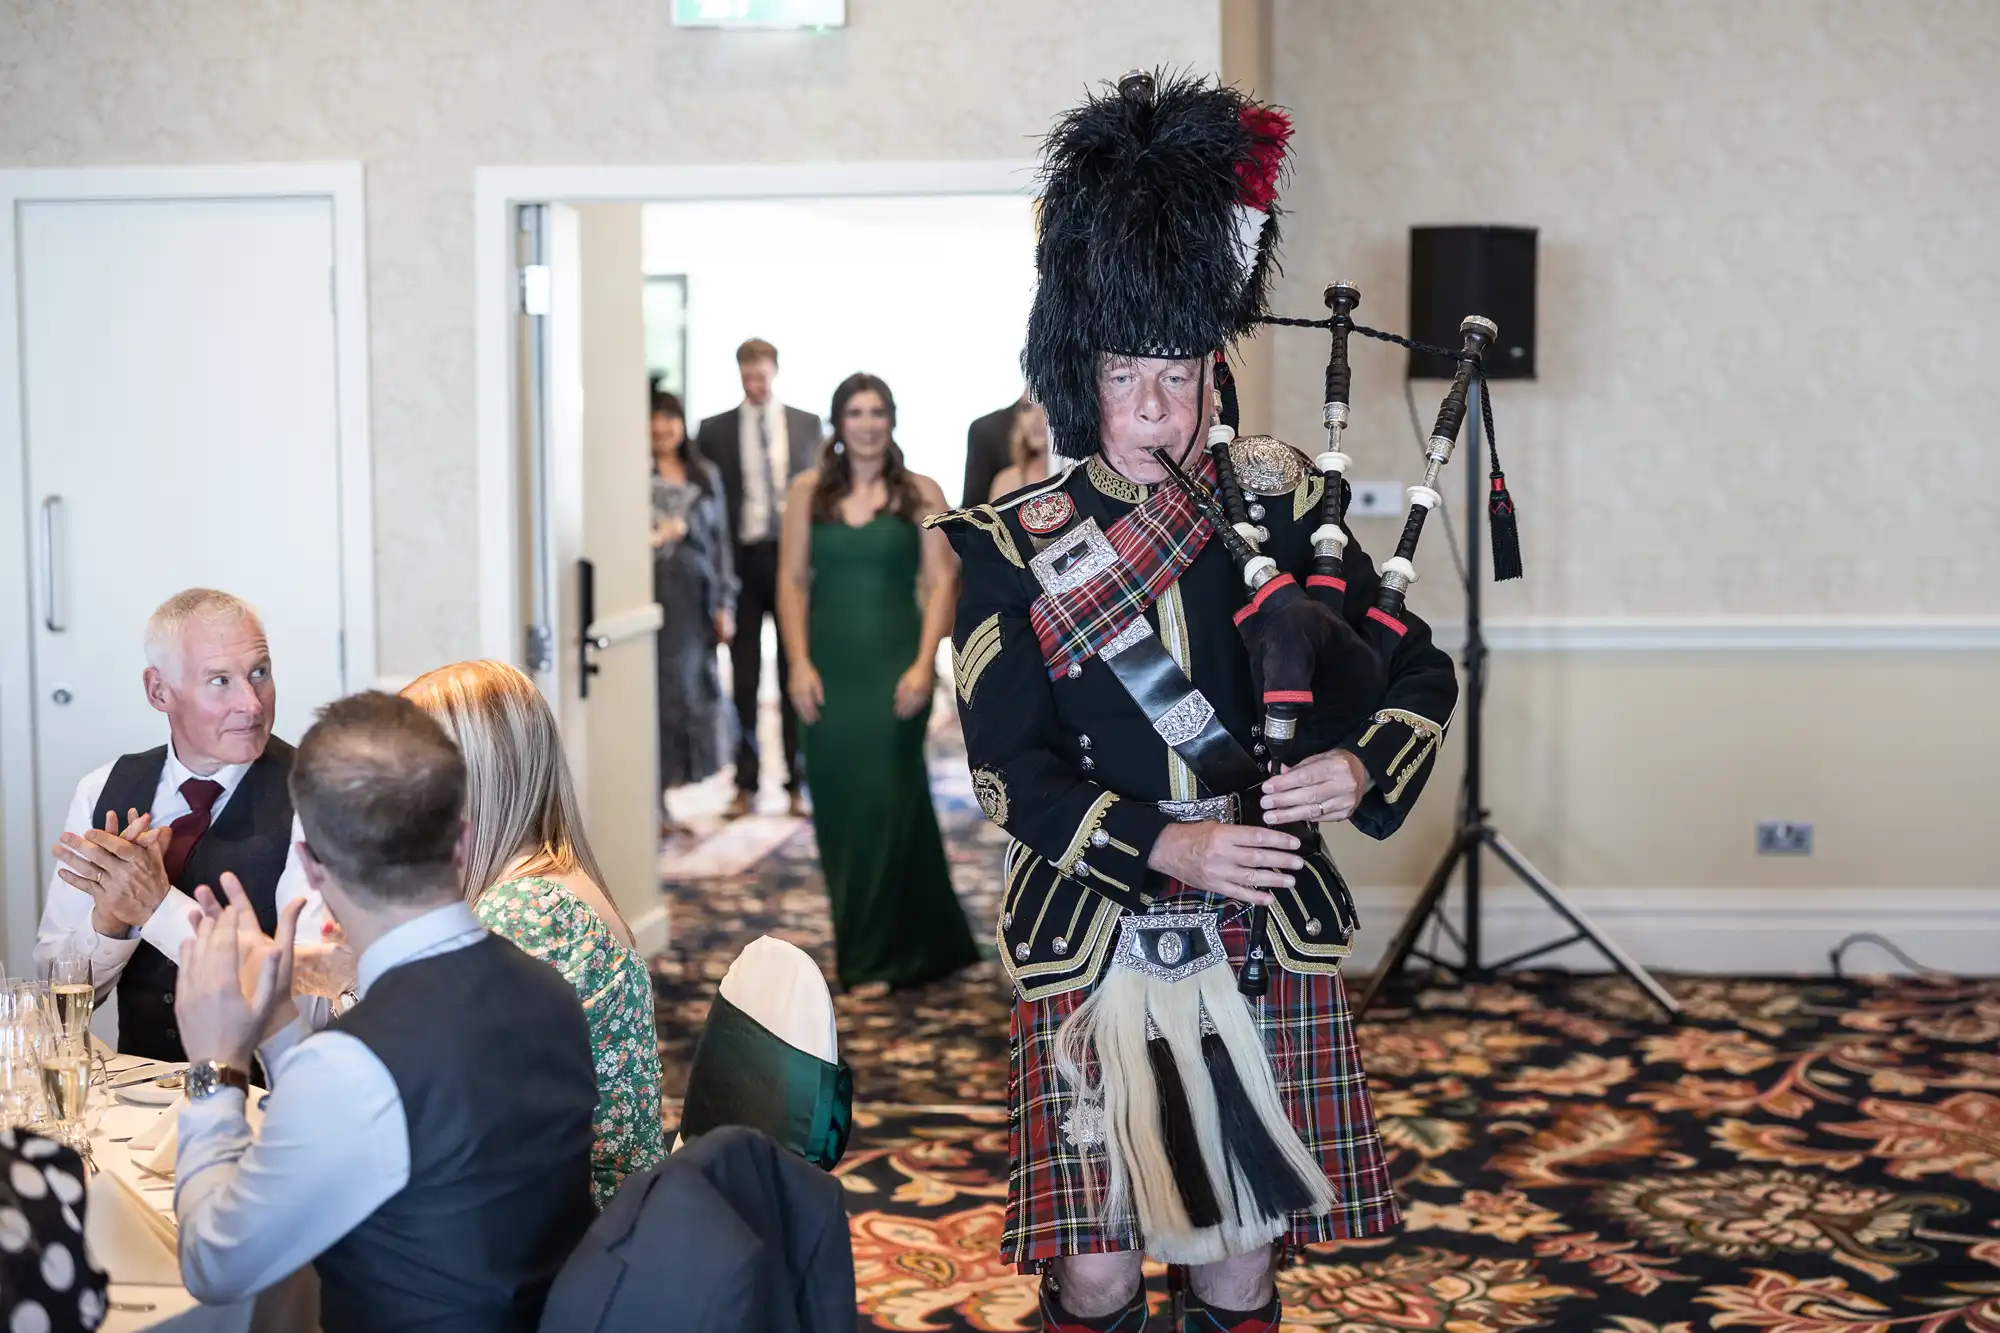 A man in traditional Scottish attire playing bagpipes at an indoor event, with guests seated at tables looking on.